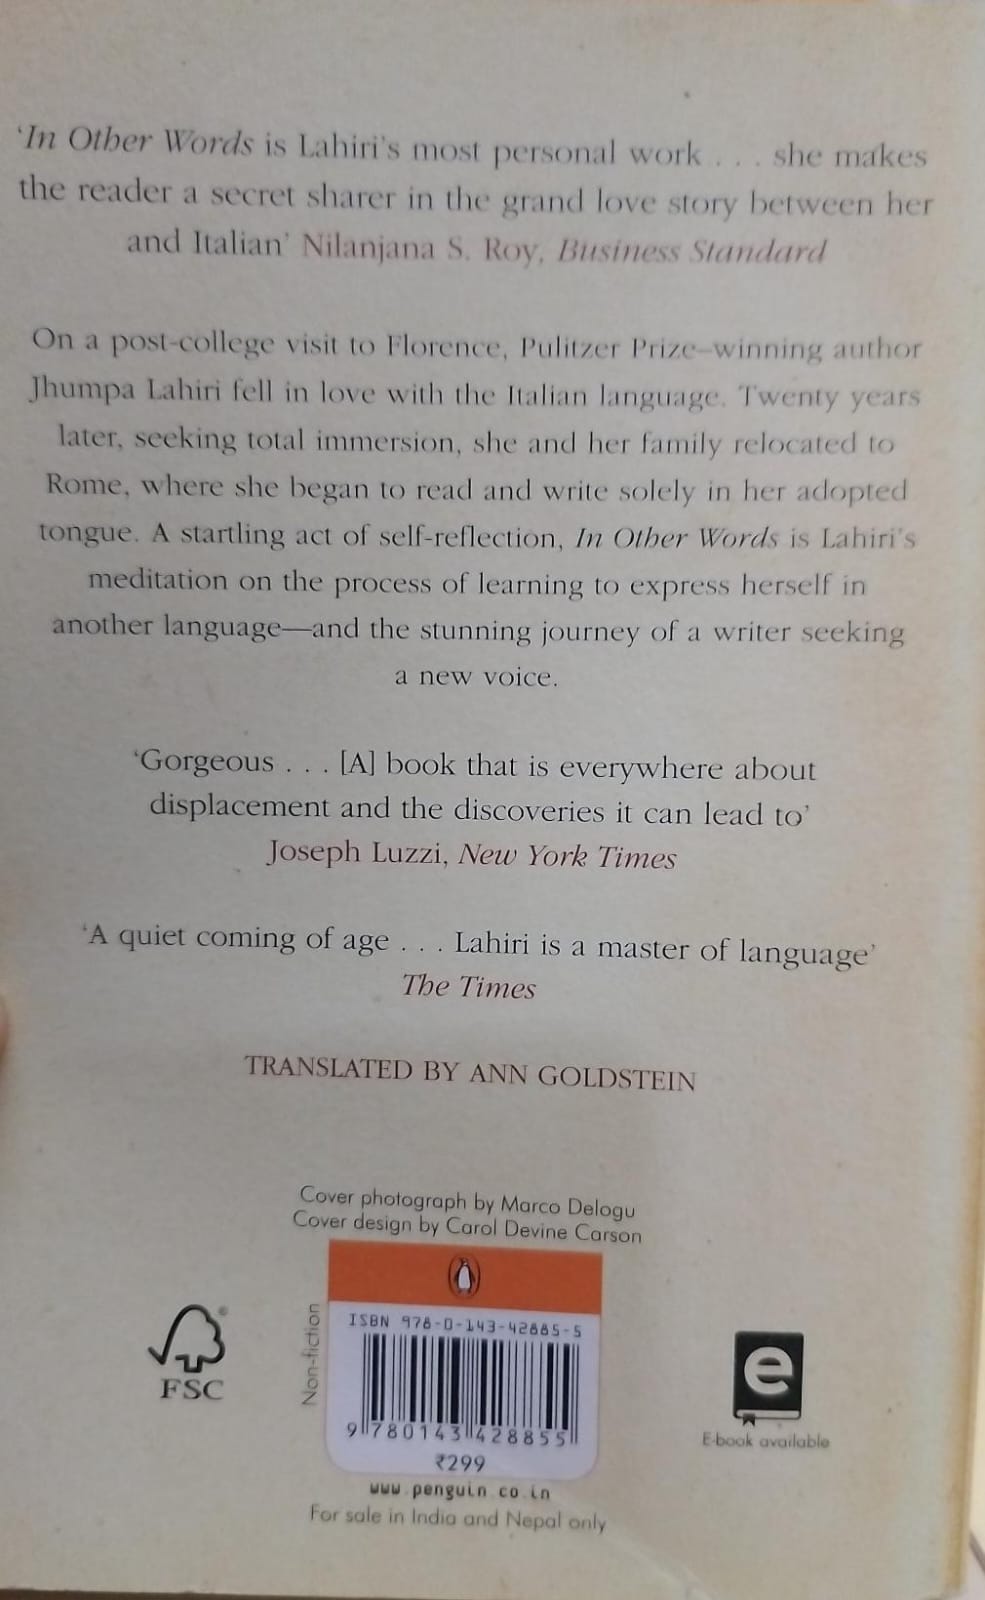 (Used) In Other Words - Jhumpa Lahiri (Papercover)